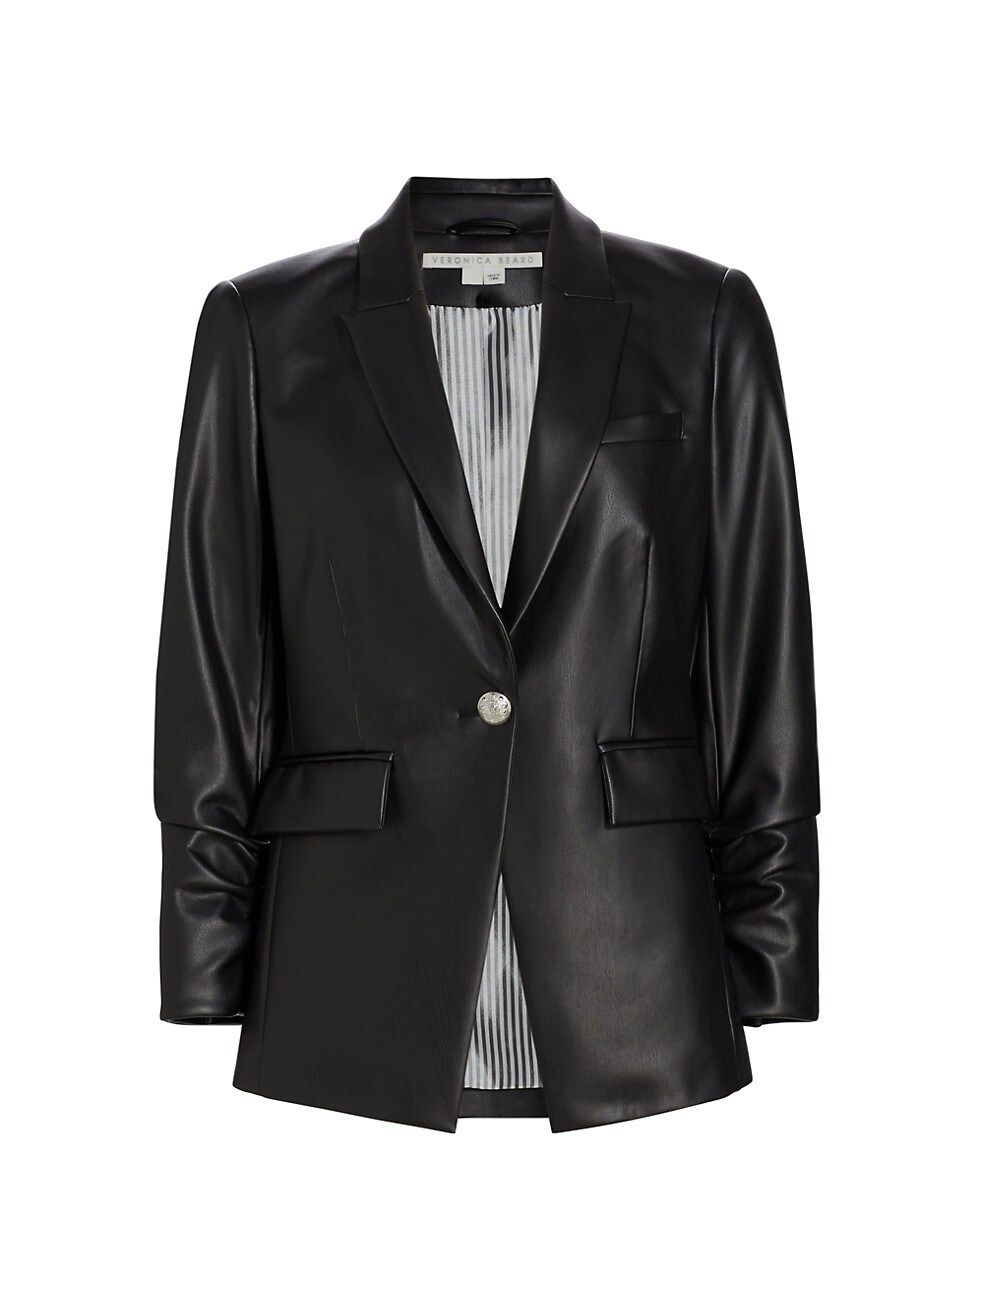 Veronica Beard


Hollis Faux Leather Dickey Jacket



5 out of 5 Customer Rating | Saks Fifth Avenue